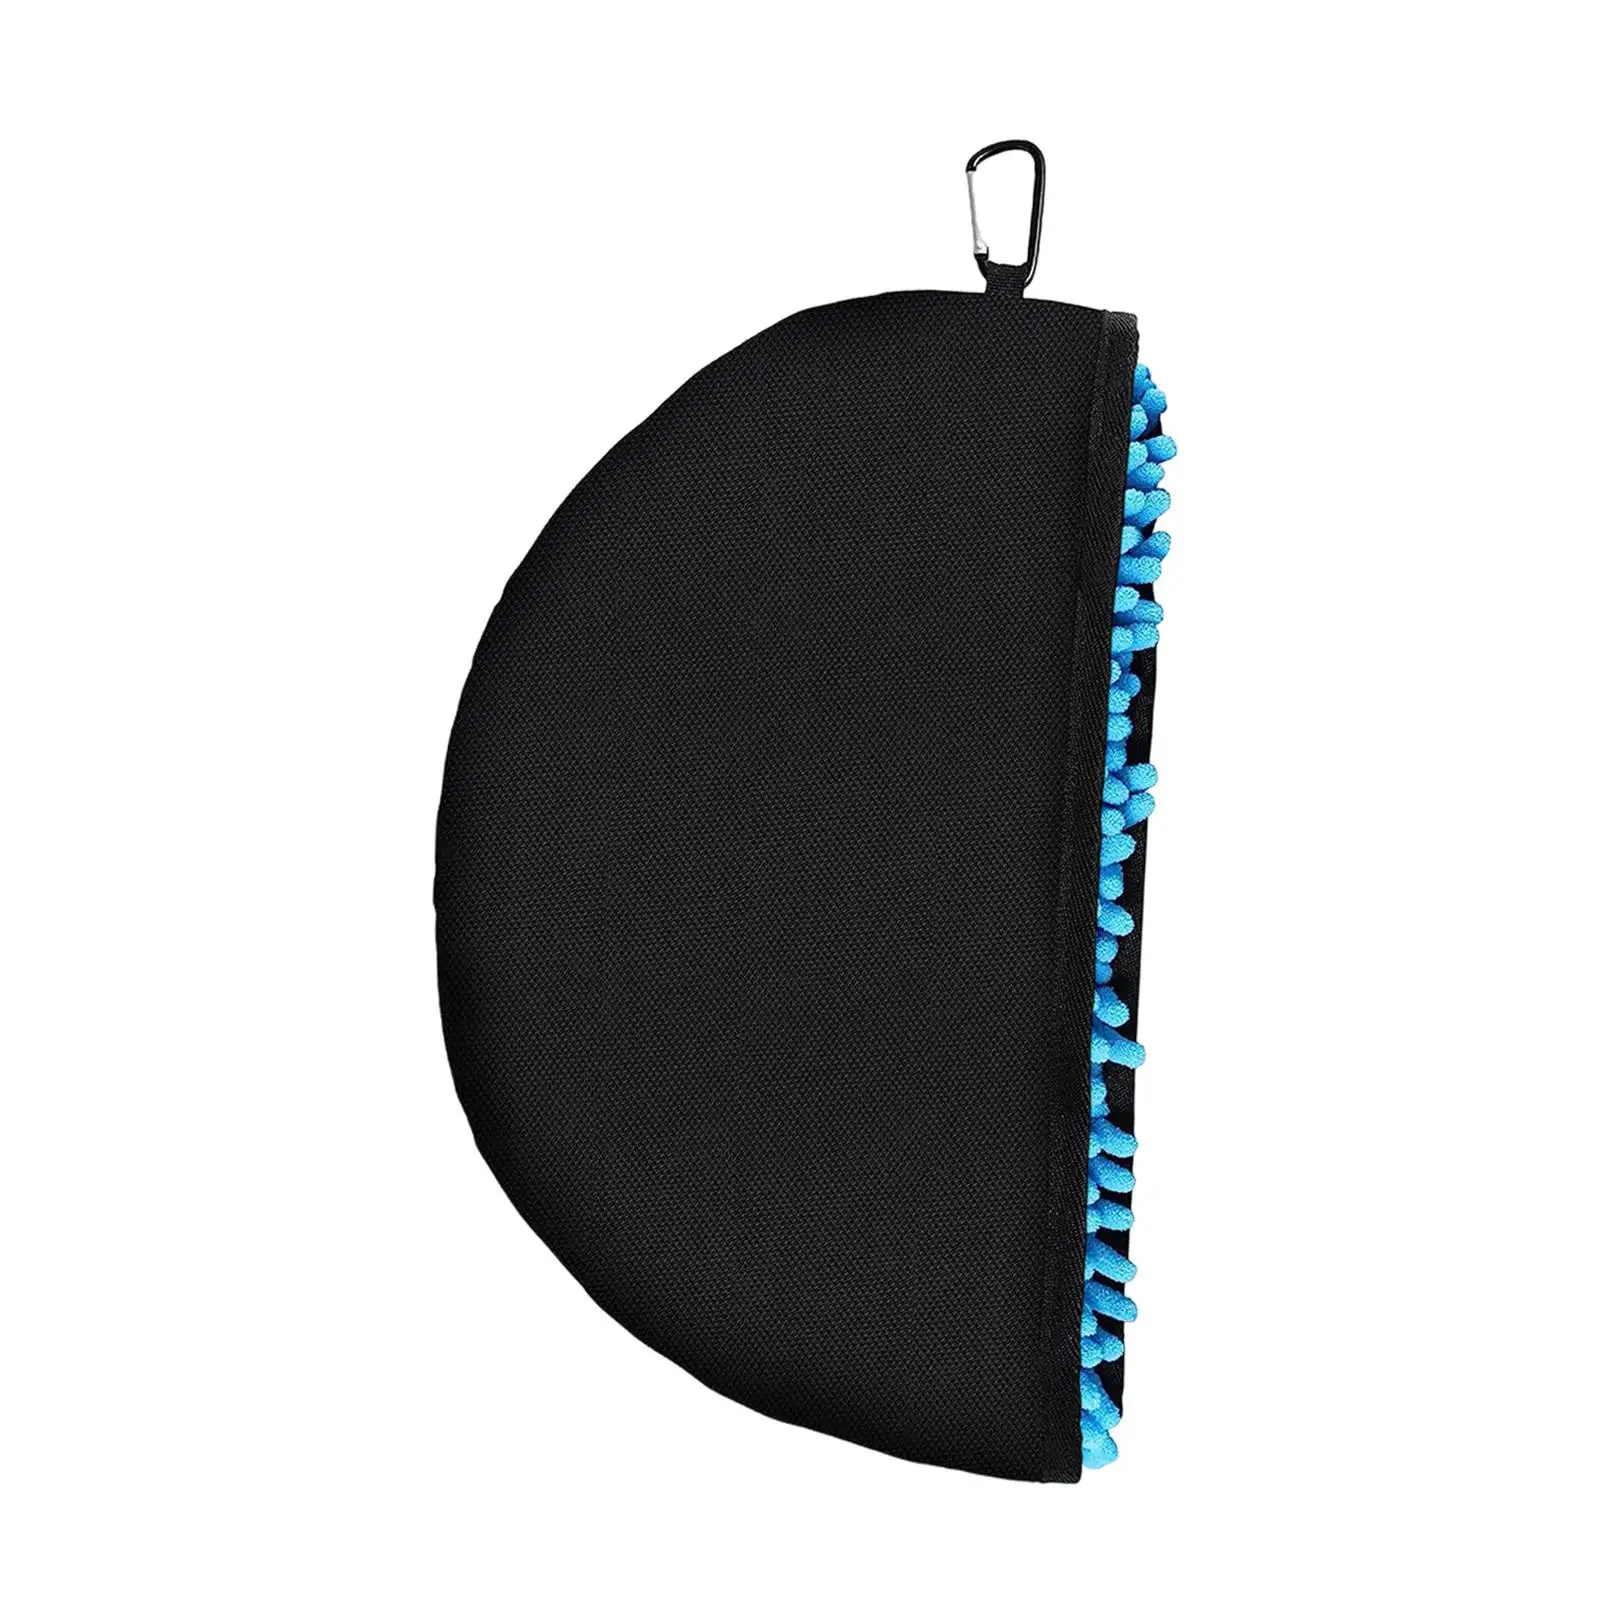 Flying Disc Cleaning Tool Lightweight Water Resistant Disc Golf Bag Tote Portable Disc Sport Bags Pouch Cleaning Tool